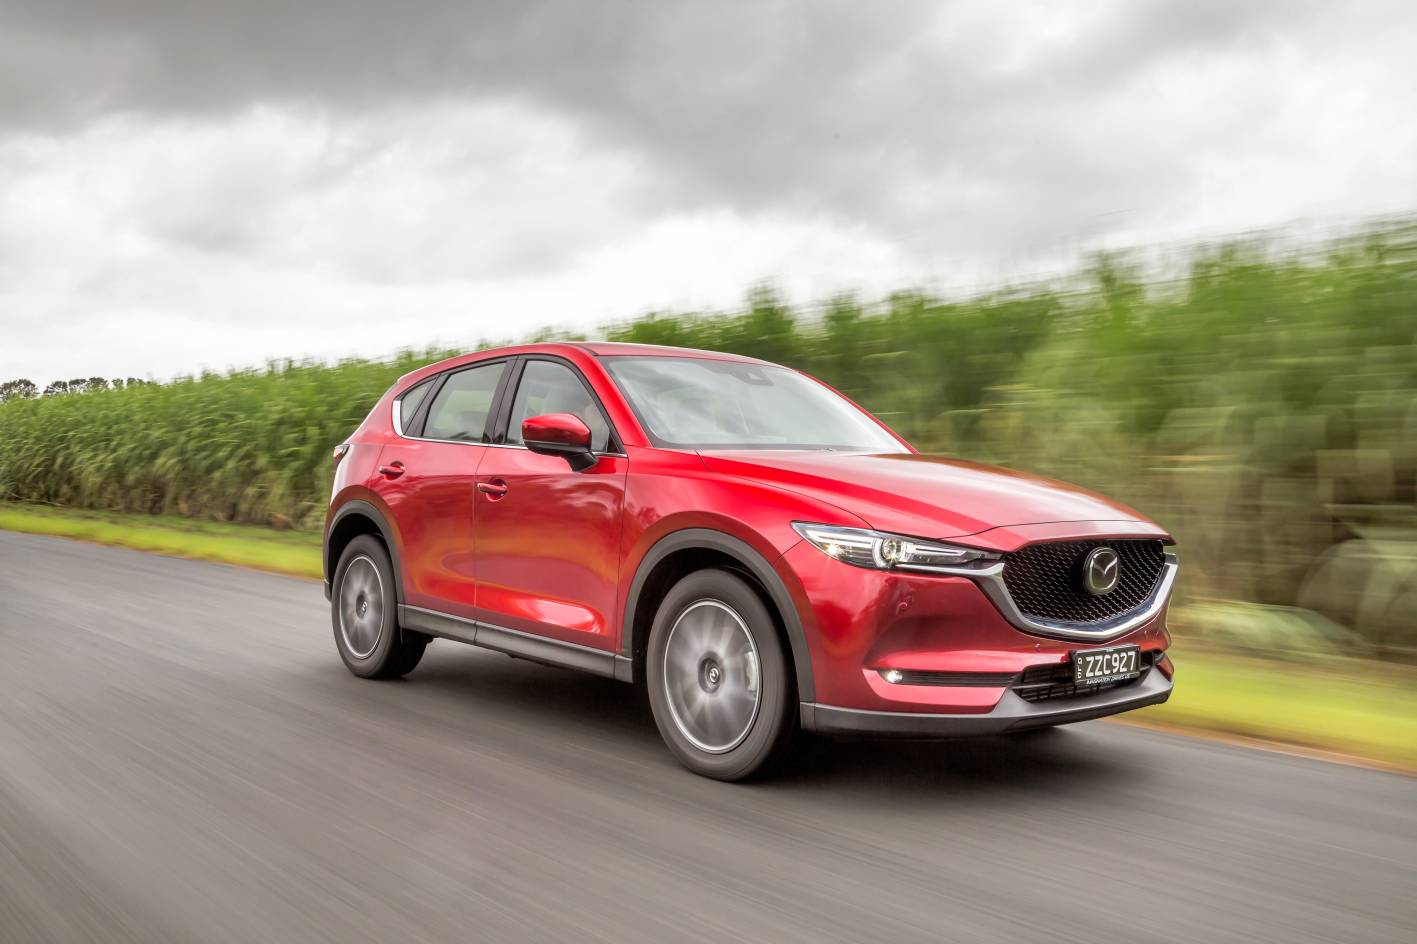 2018 Mazda CX-5 Review, Pricing, and Specs